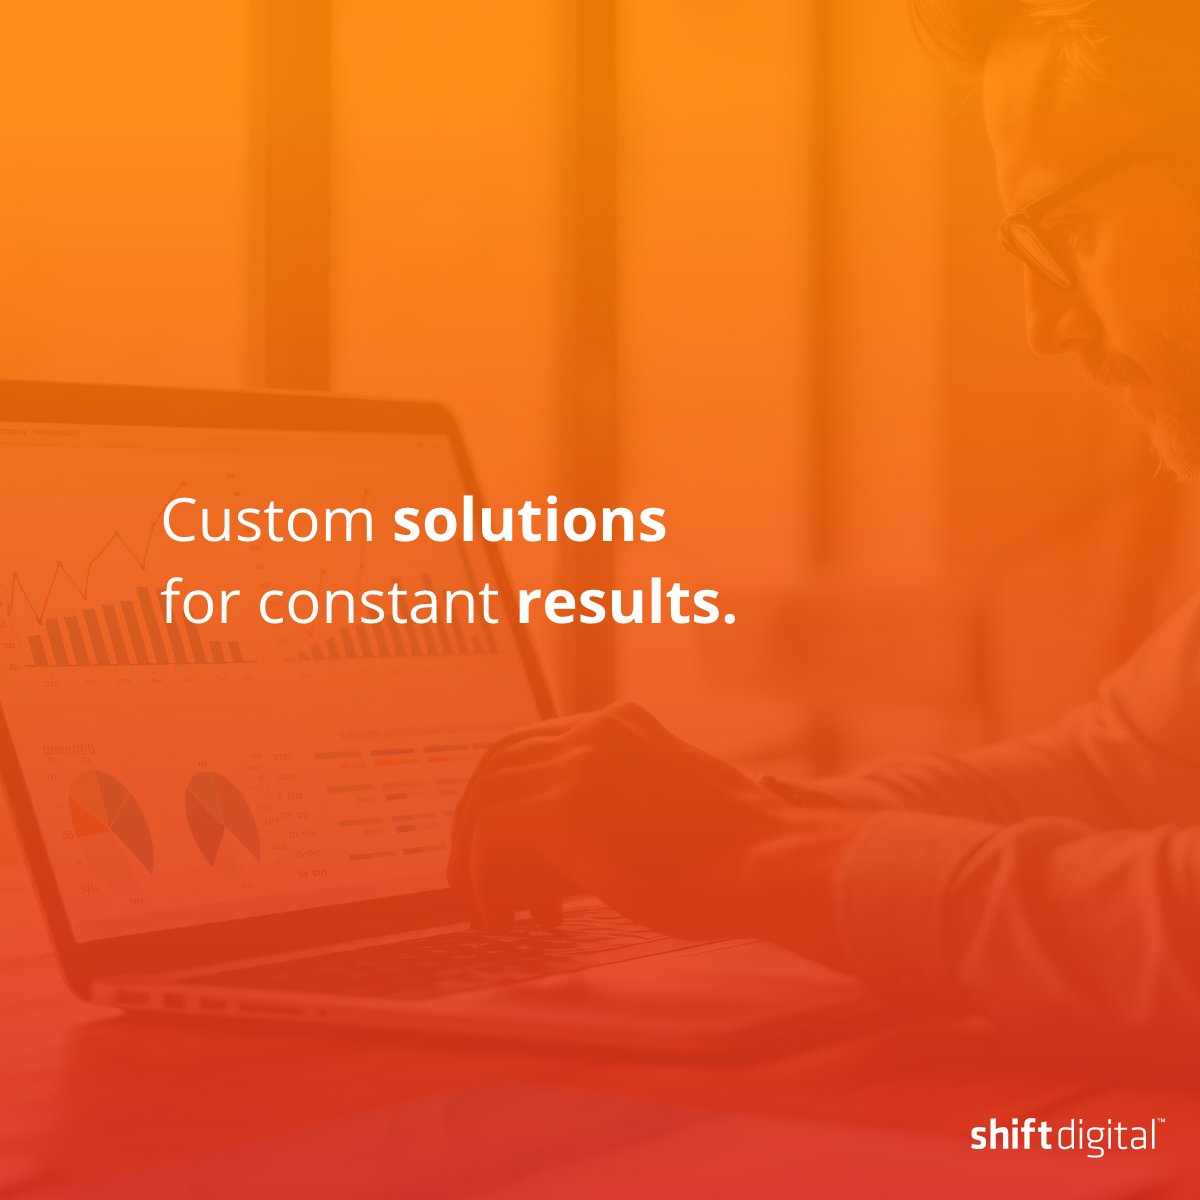 At #ShiftDigital, we like to keep it in-house. We develop the game-changing digital solutions that enable our clients to achieve results. ow.ly/8MJx50Qg95s #ShiftDigital #DigitalIntegration #DigitalOptimization